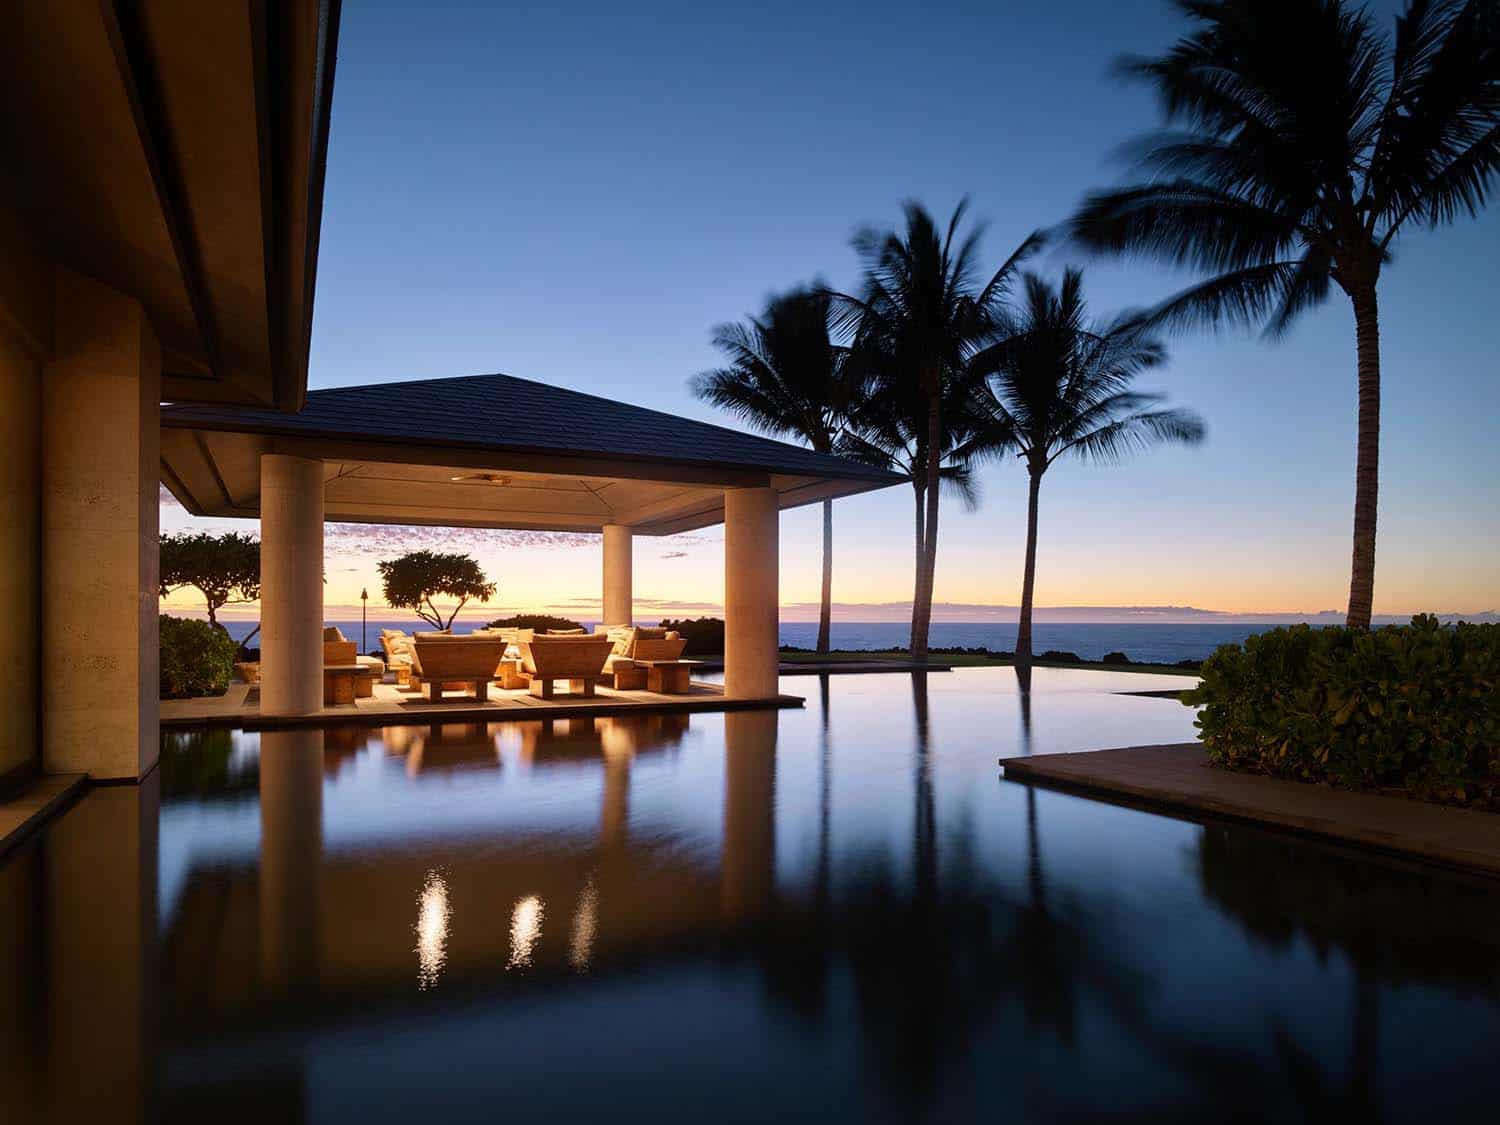 modern coastal style outdoor dining pavilion and swimming pool at dusk